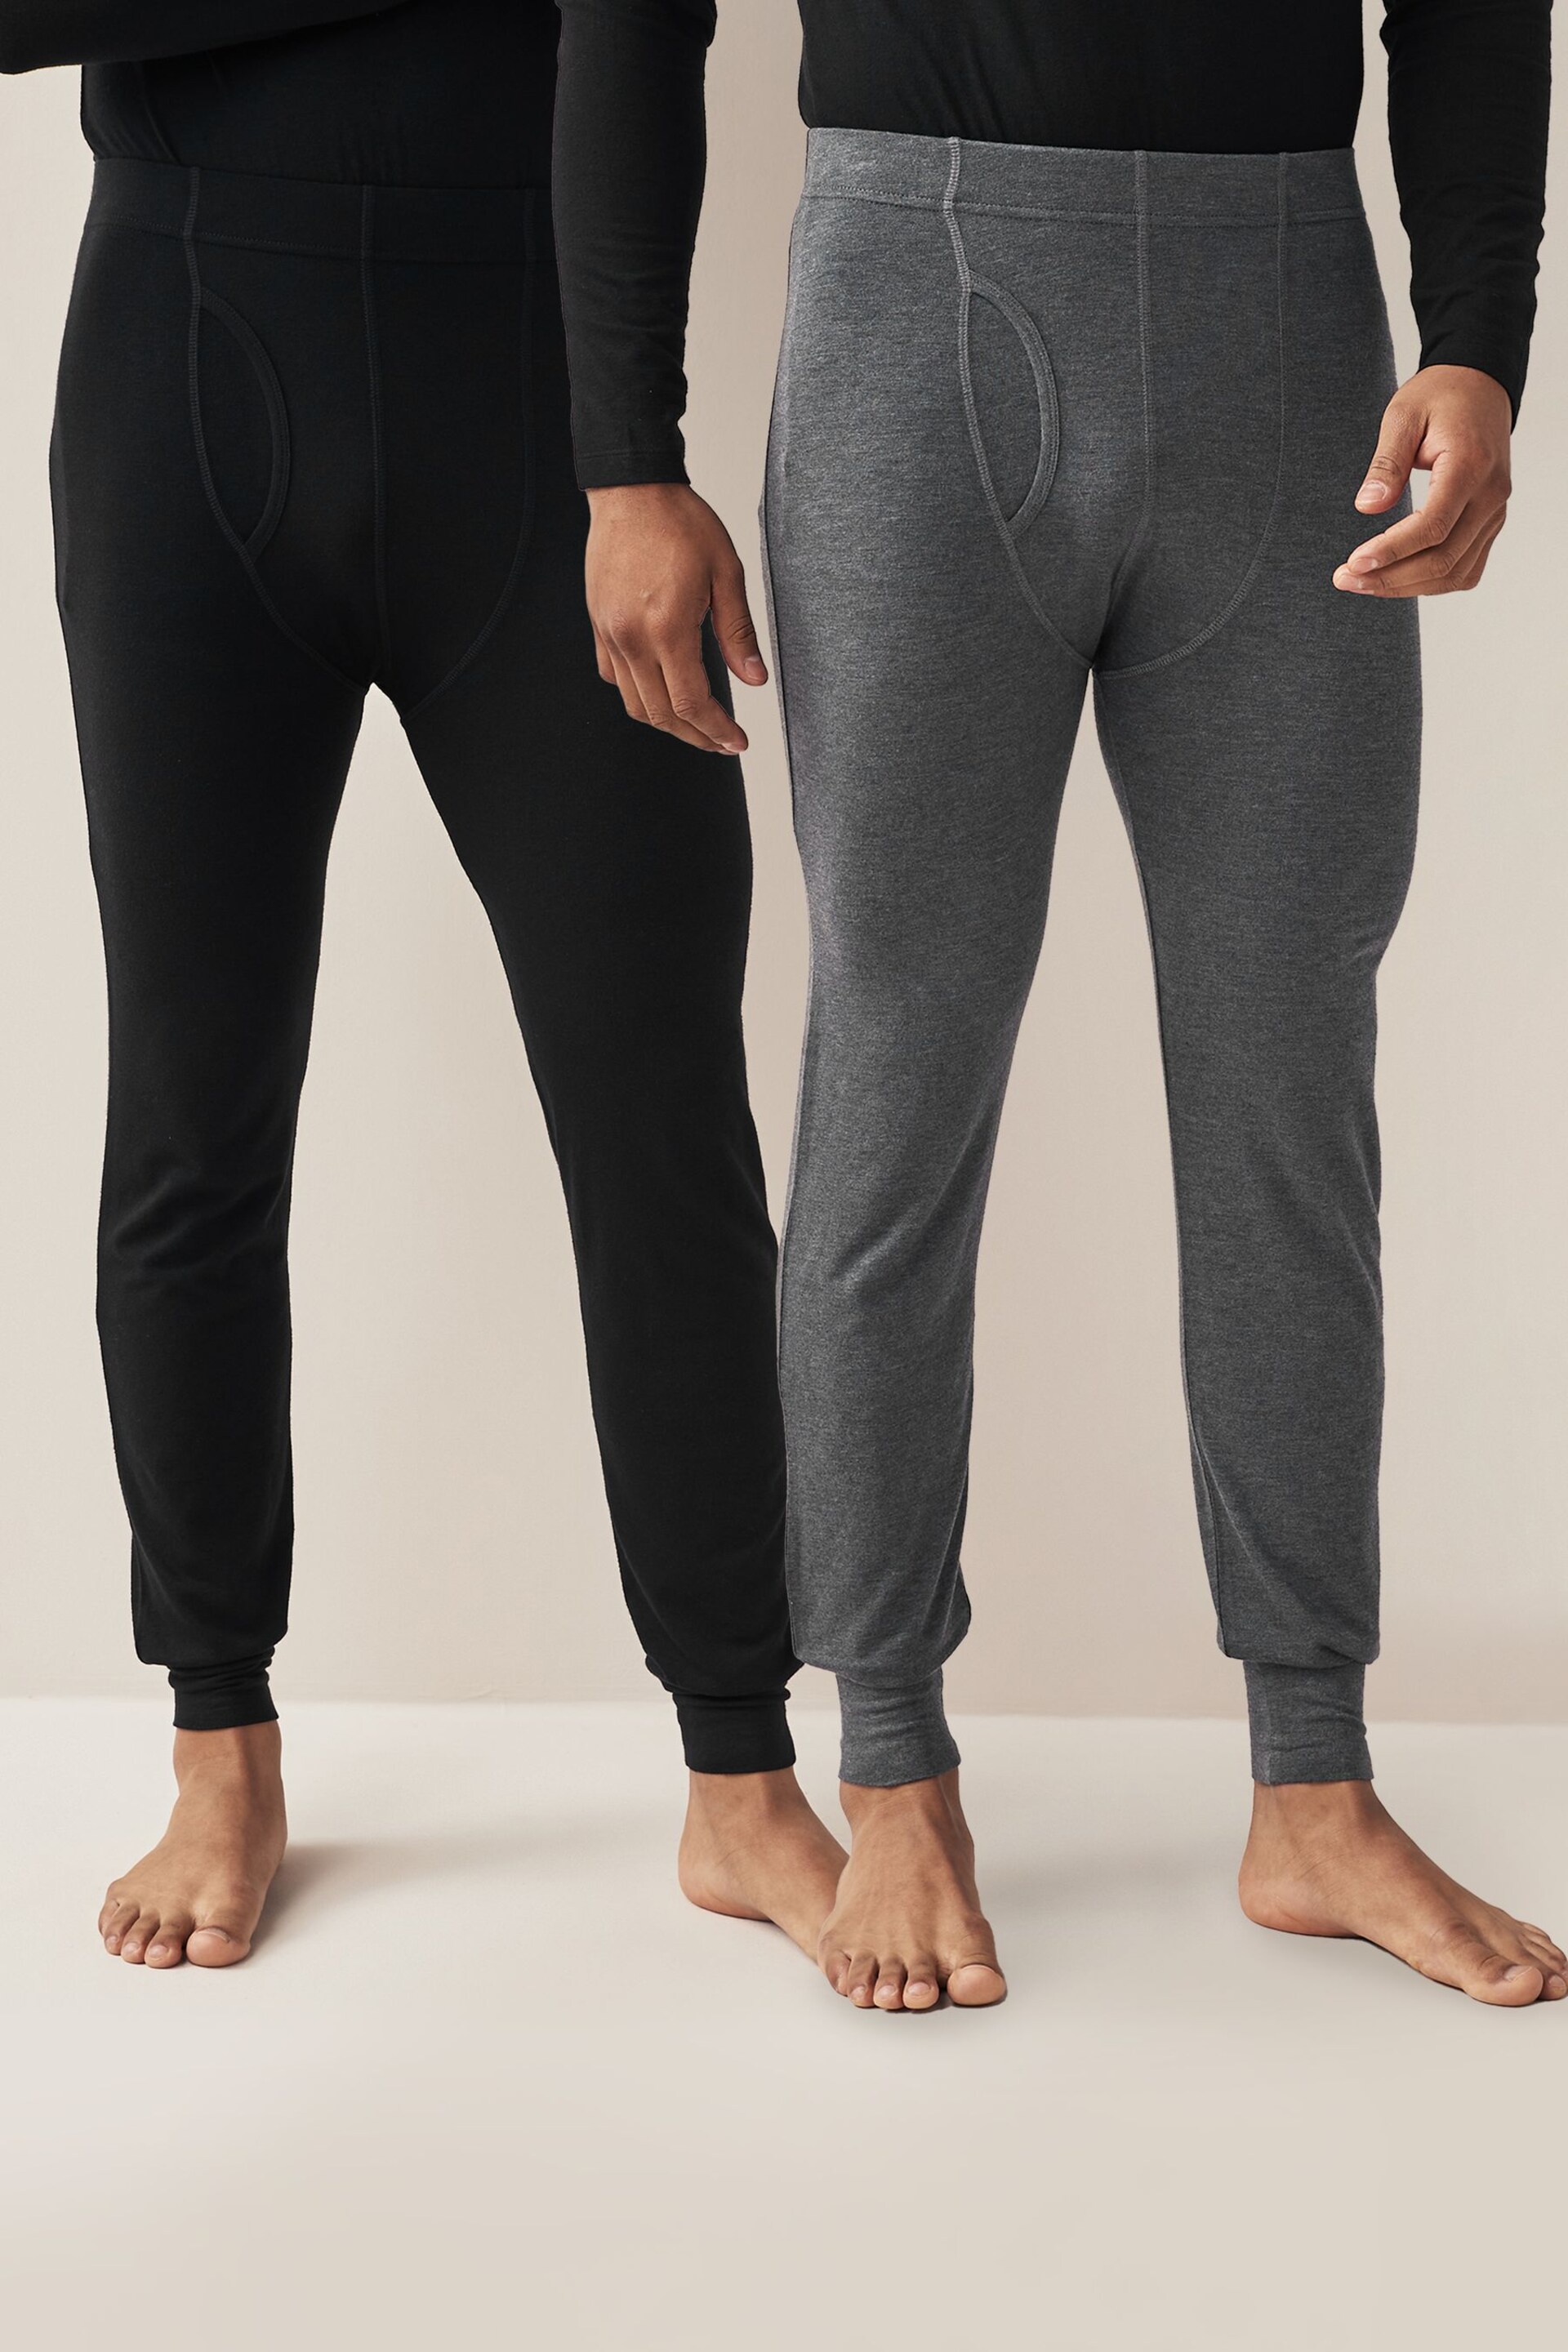 Black/Grey 2 Pack Lightweight Thermal Long Johns - Image 1 of 10